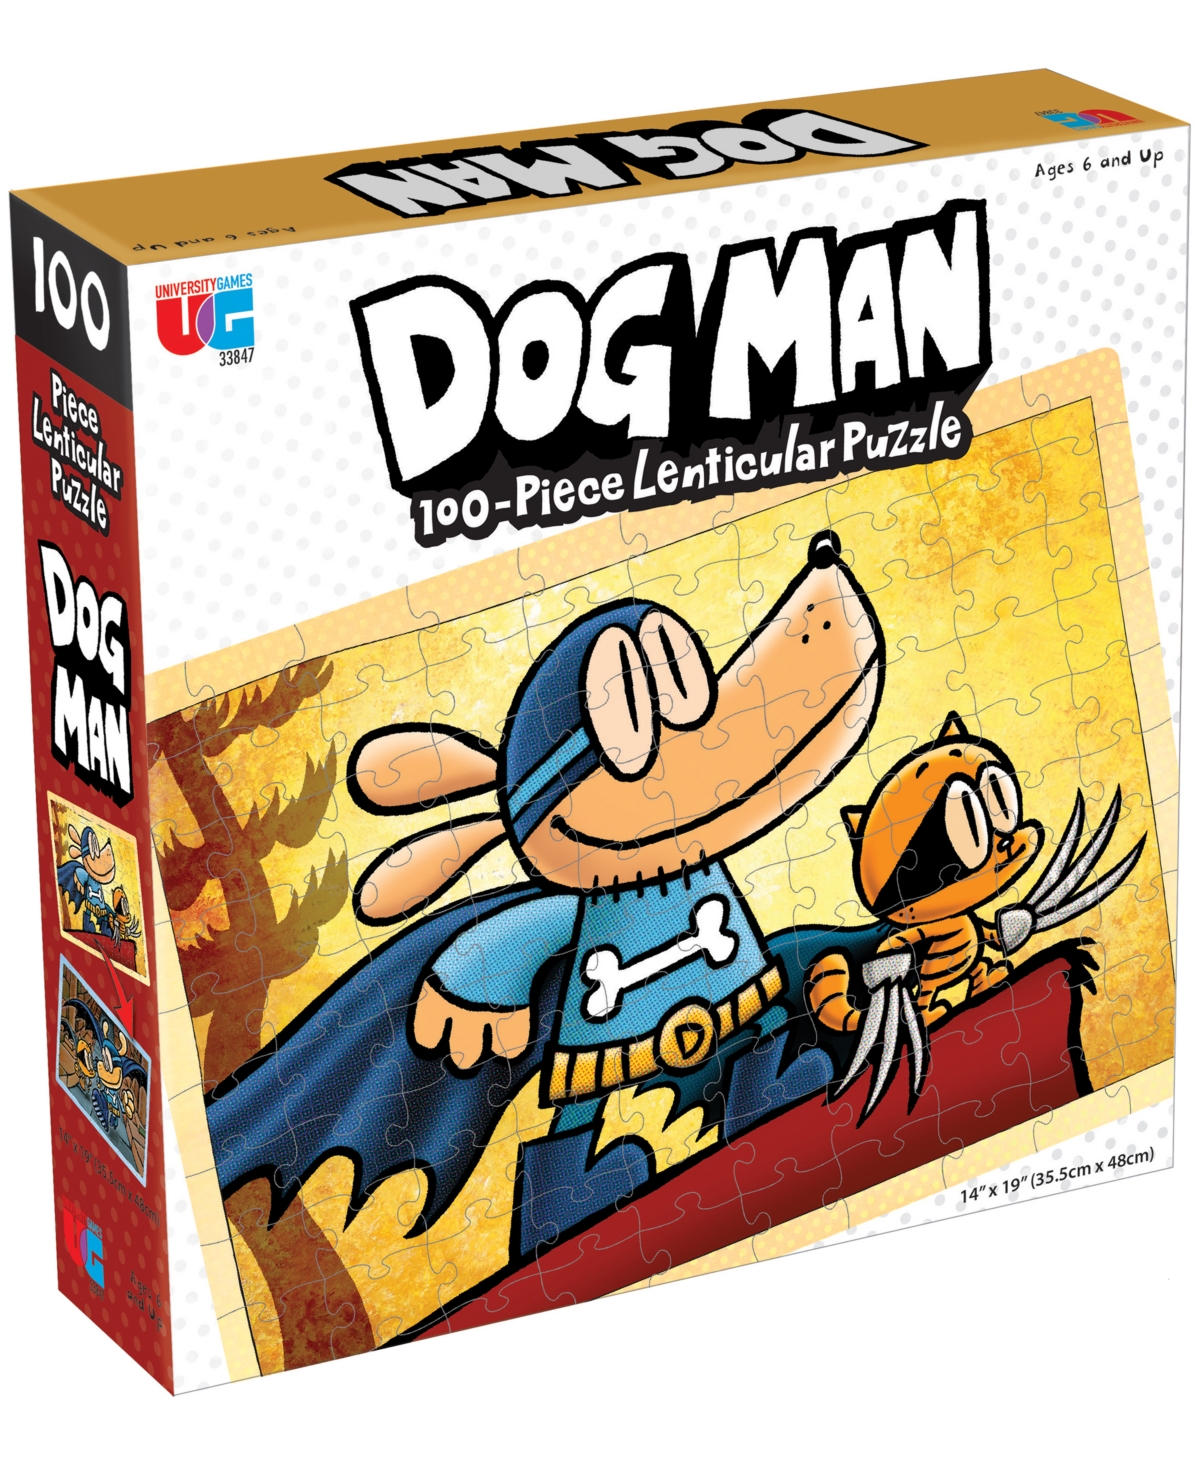 University Games Kids' Dog Man Adventures Lenticular Jigsaw Puzzle In No Color